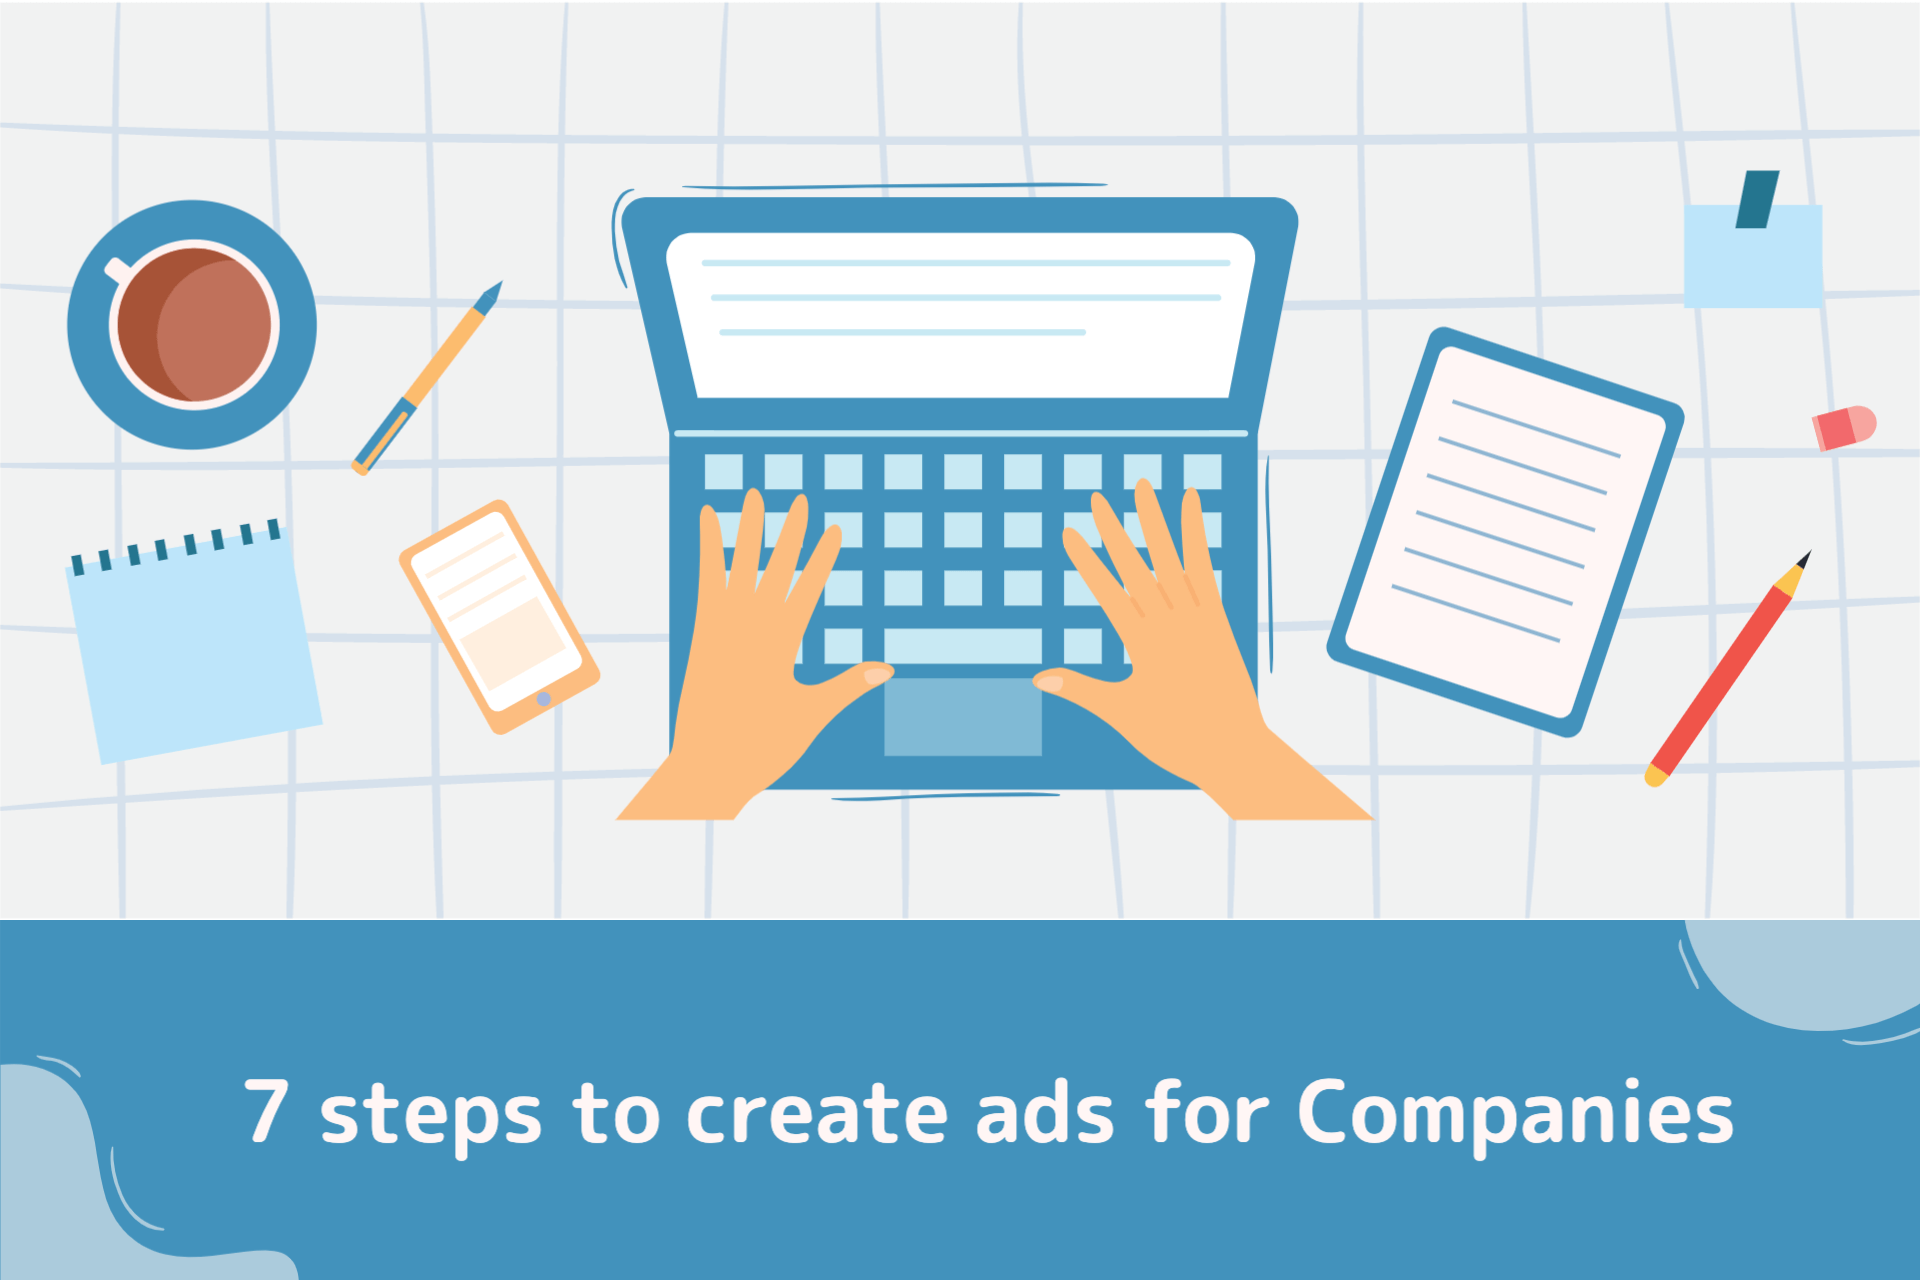 7 steps to create ads for Companies